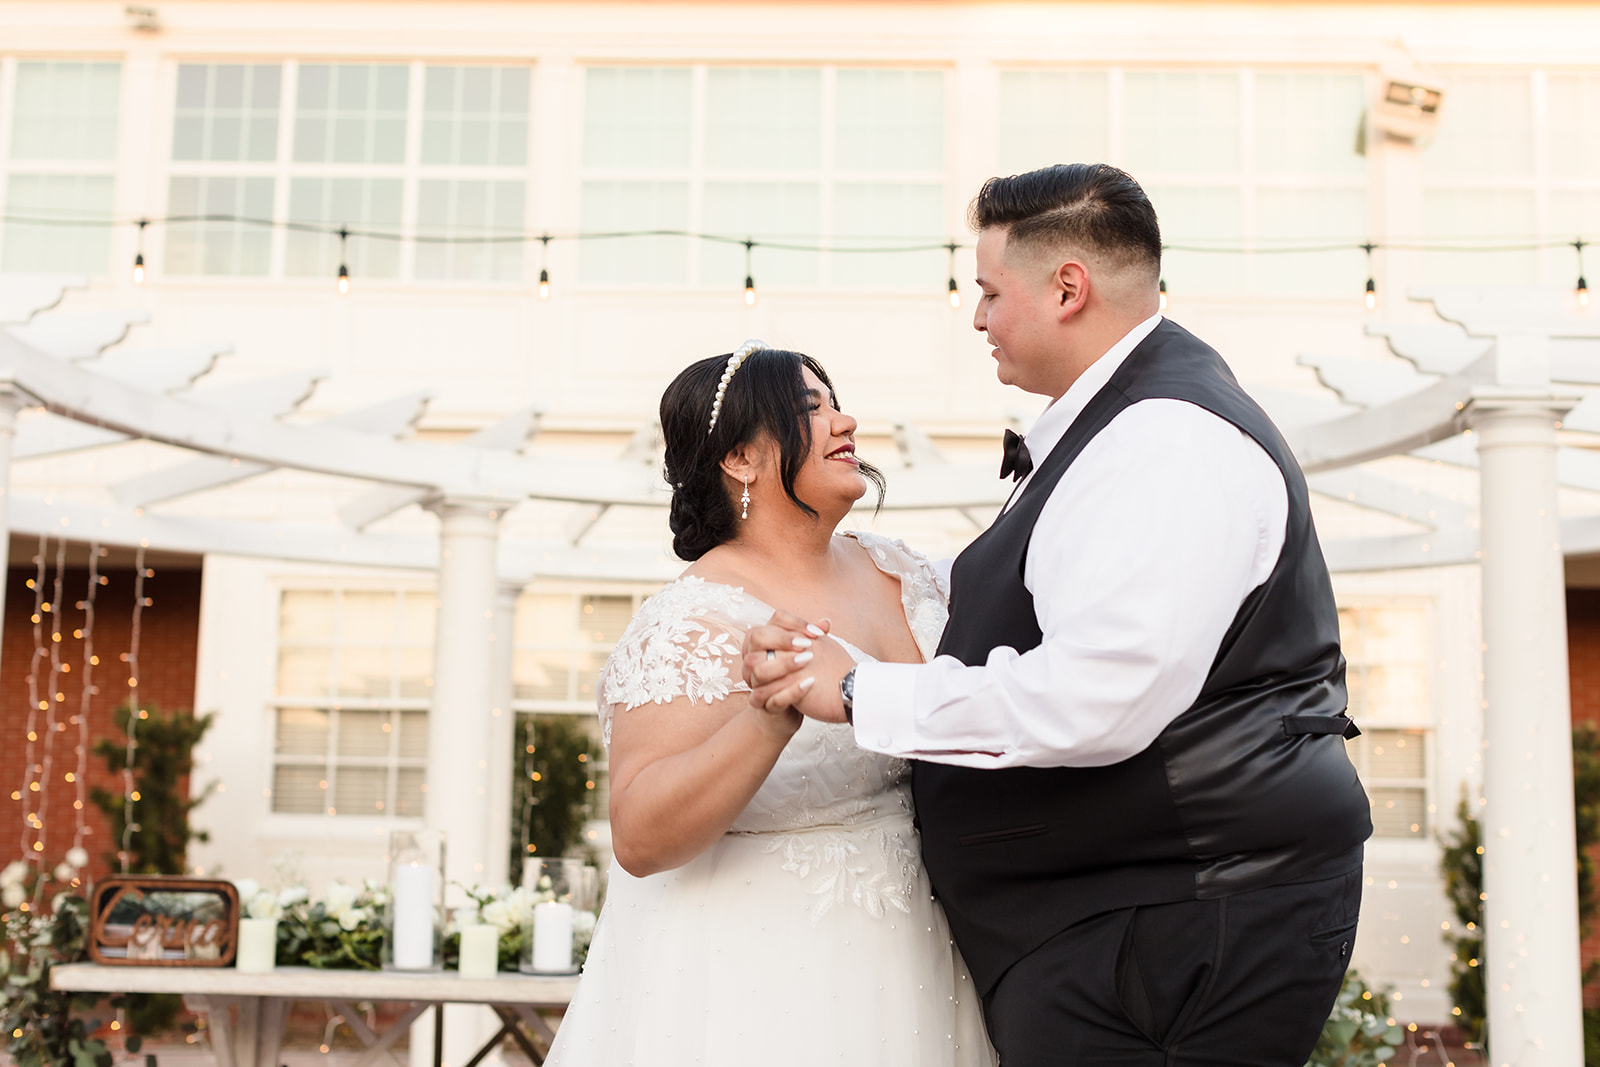 Newlyweds share their first dance in the courtyard at Crestmore Manor